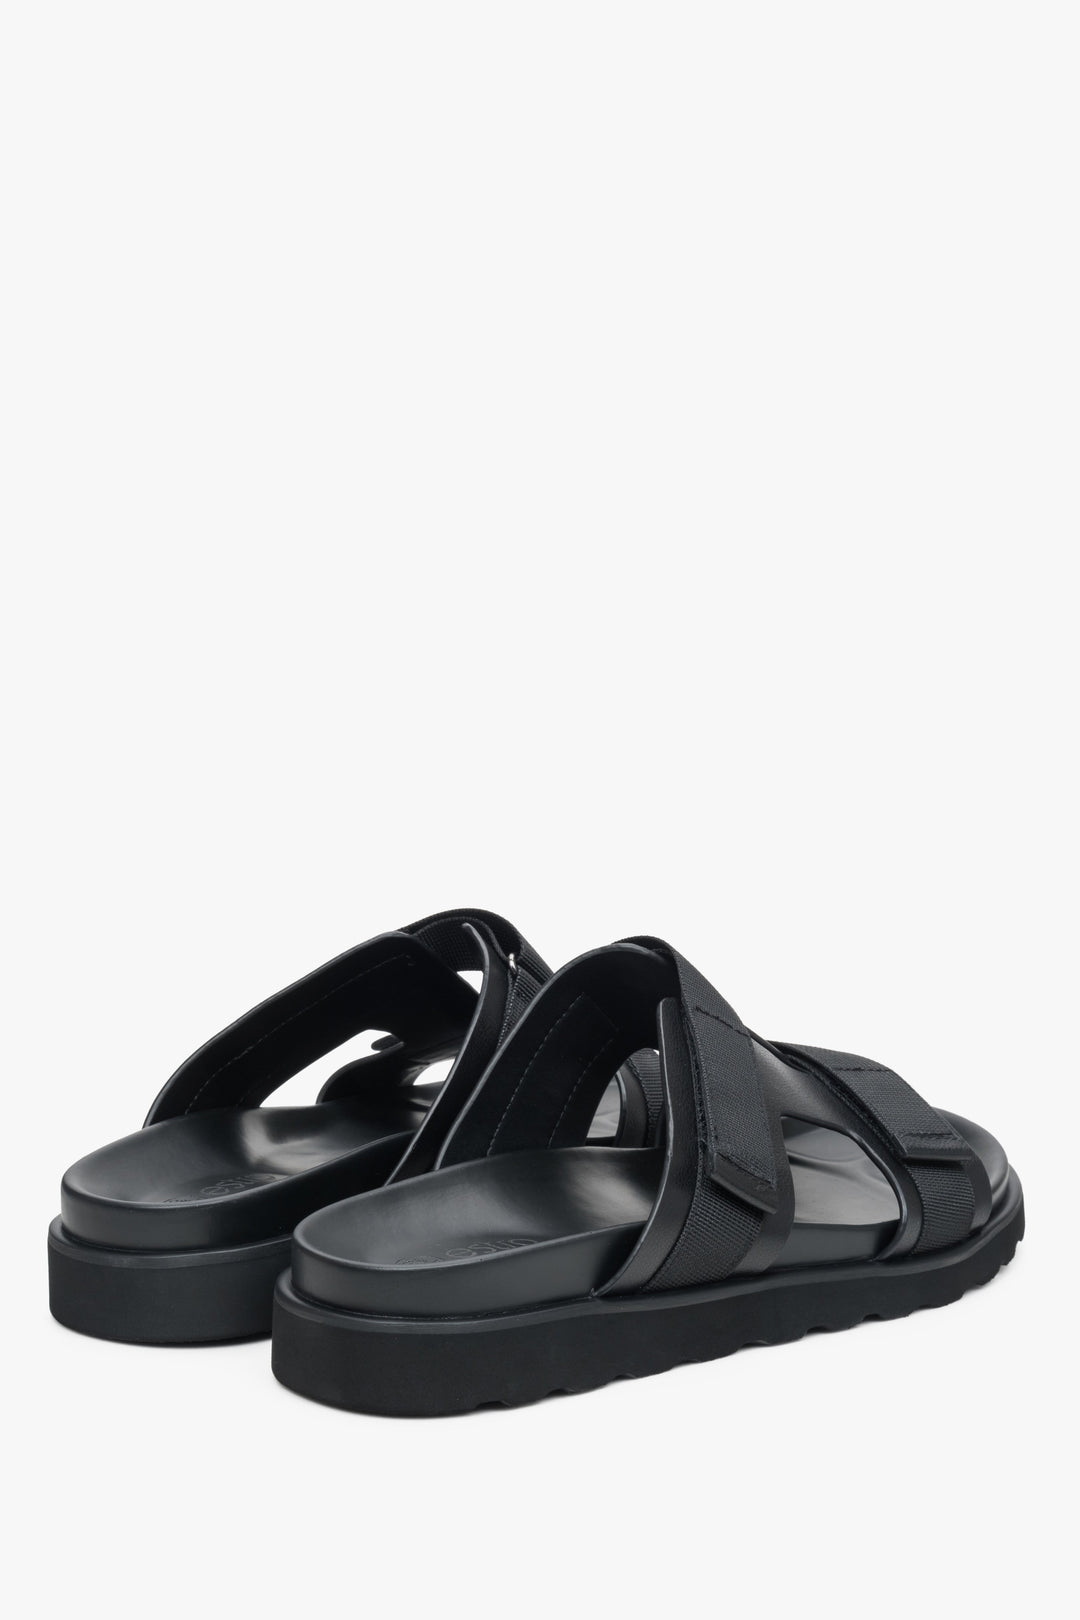 Men's black leather sandals with textile elements - close-up on the toe line and heel line.